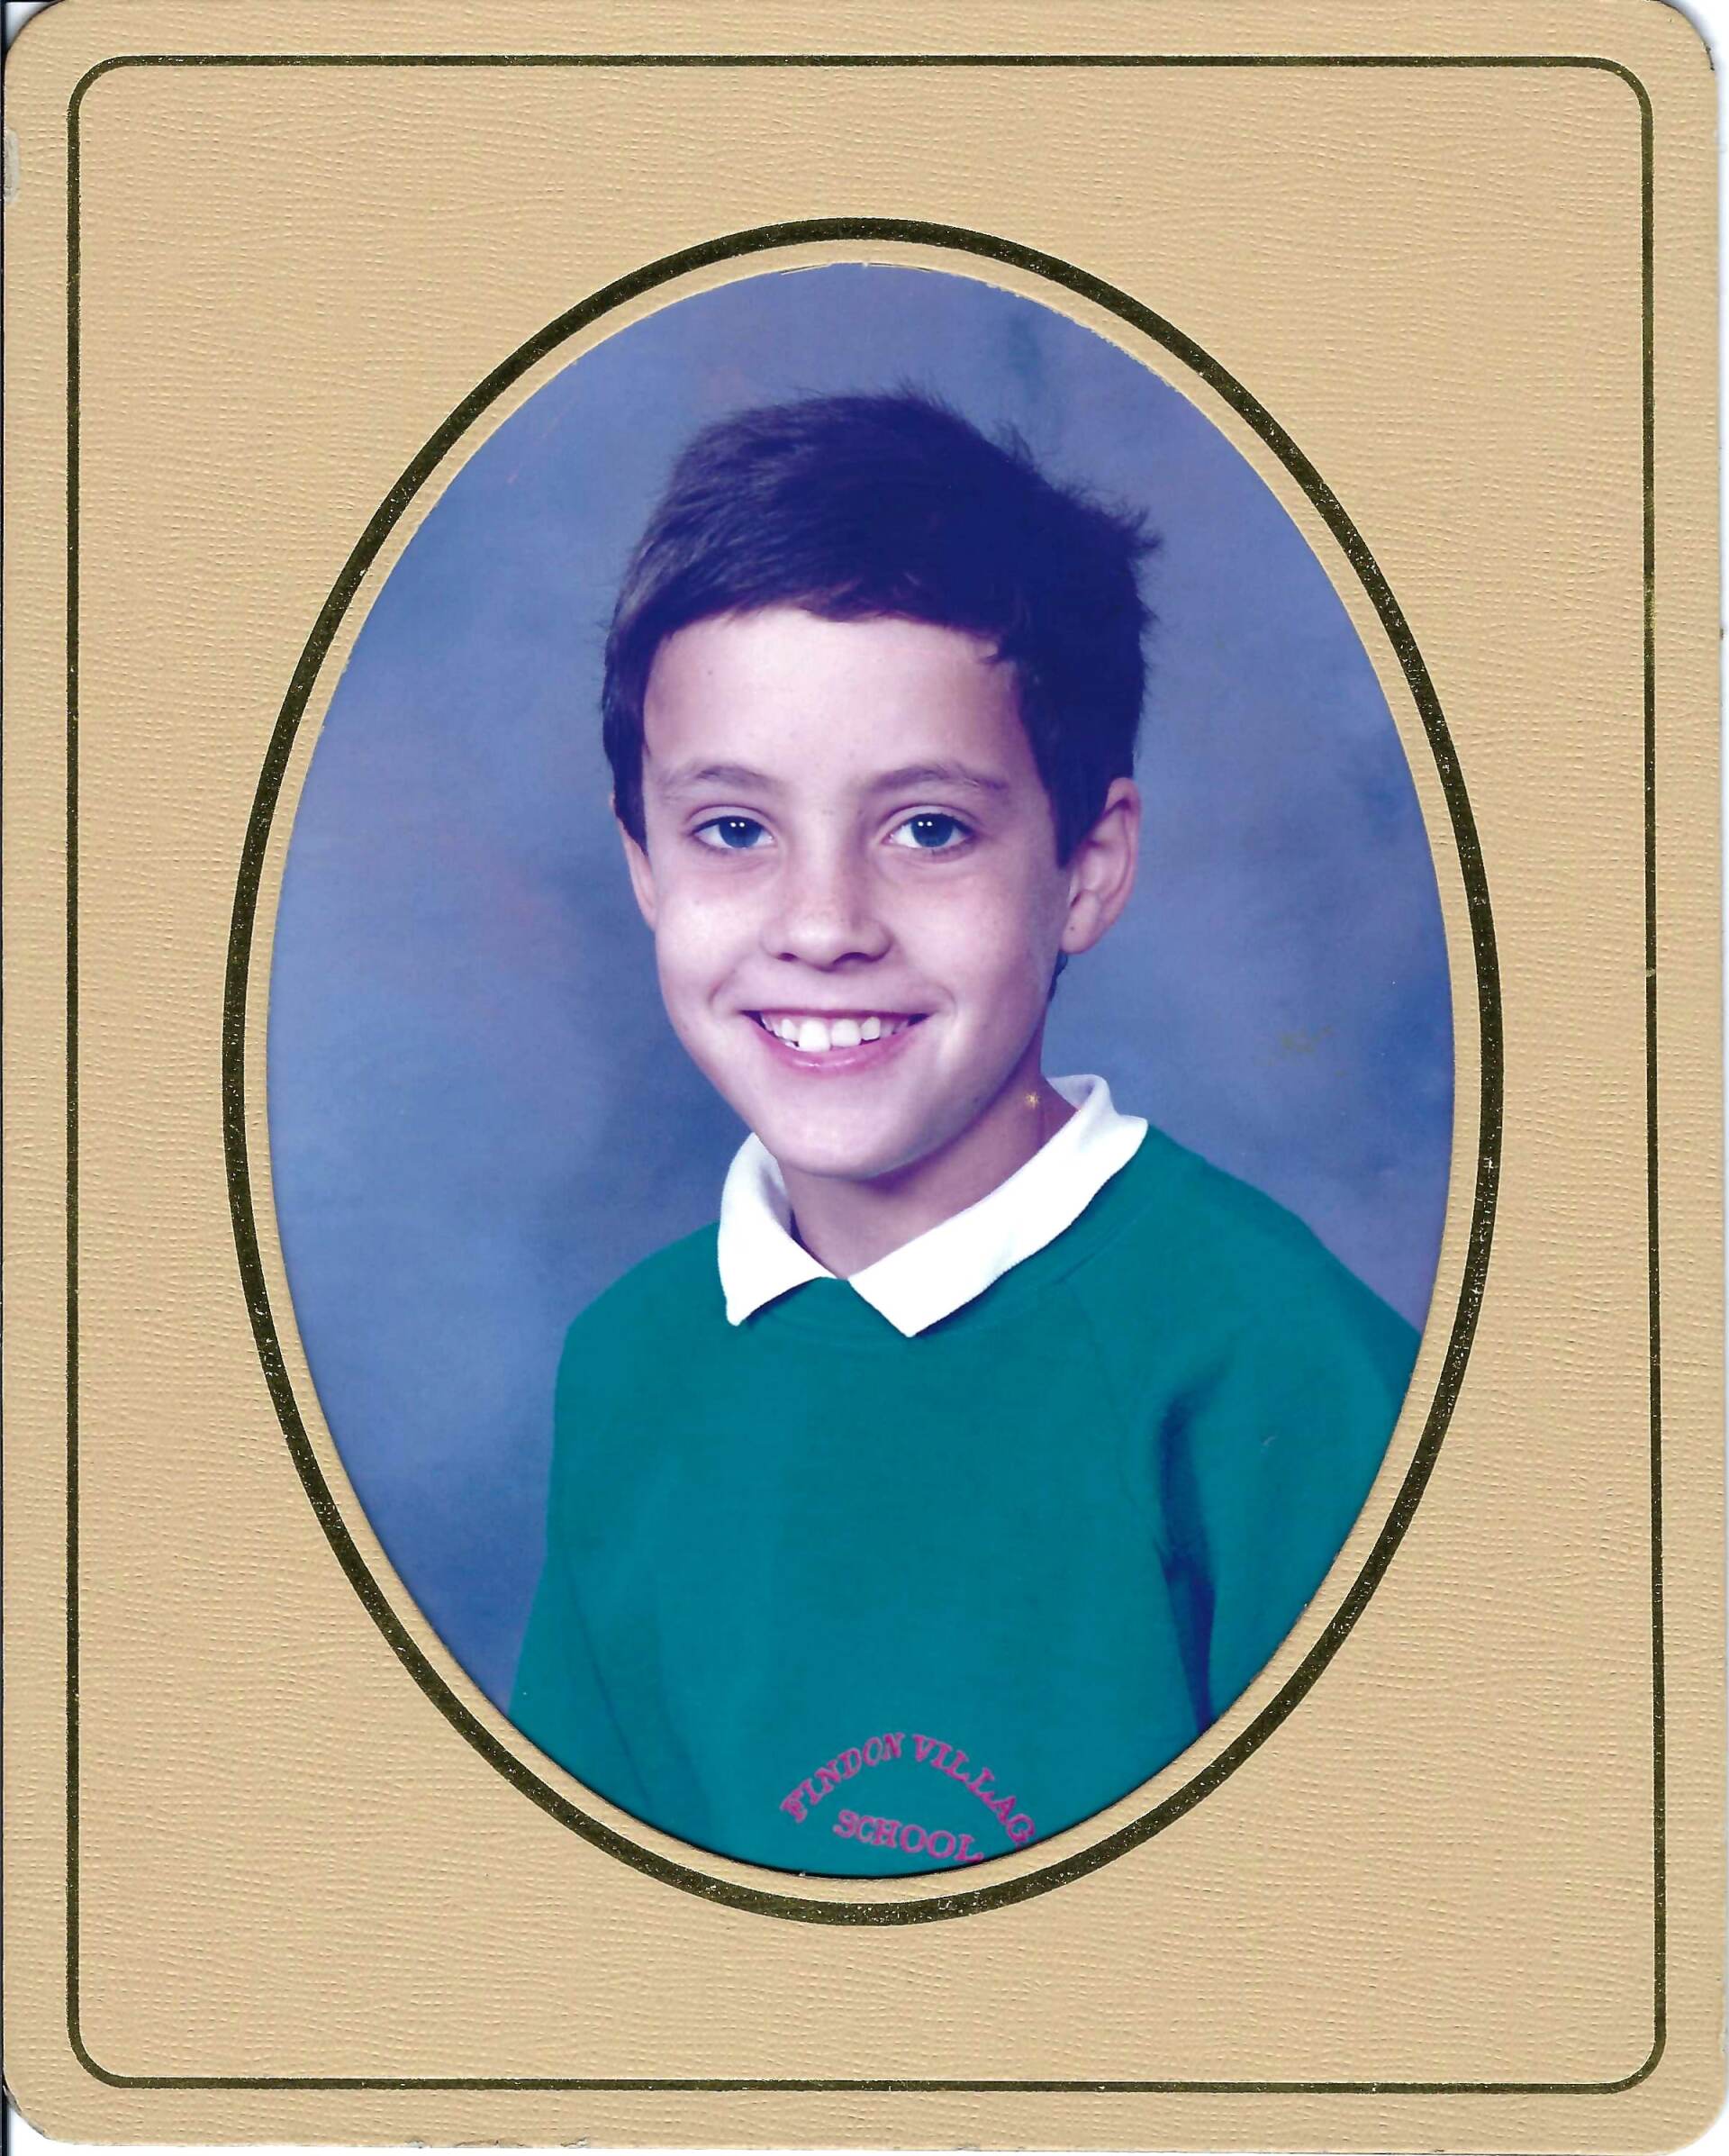 Photograph of Edward at school in 1989